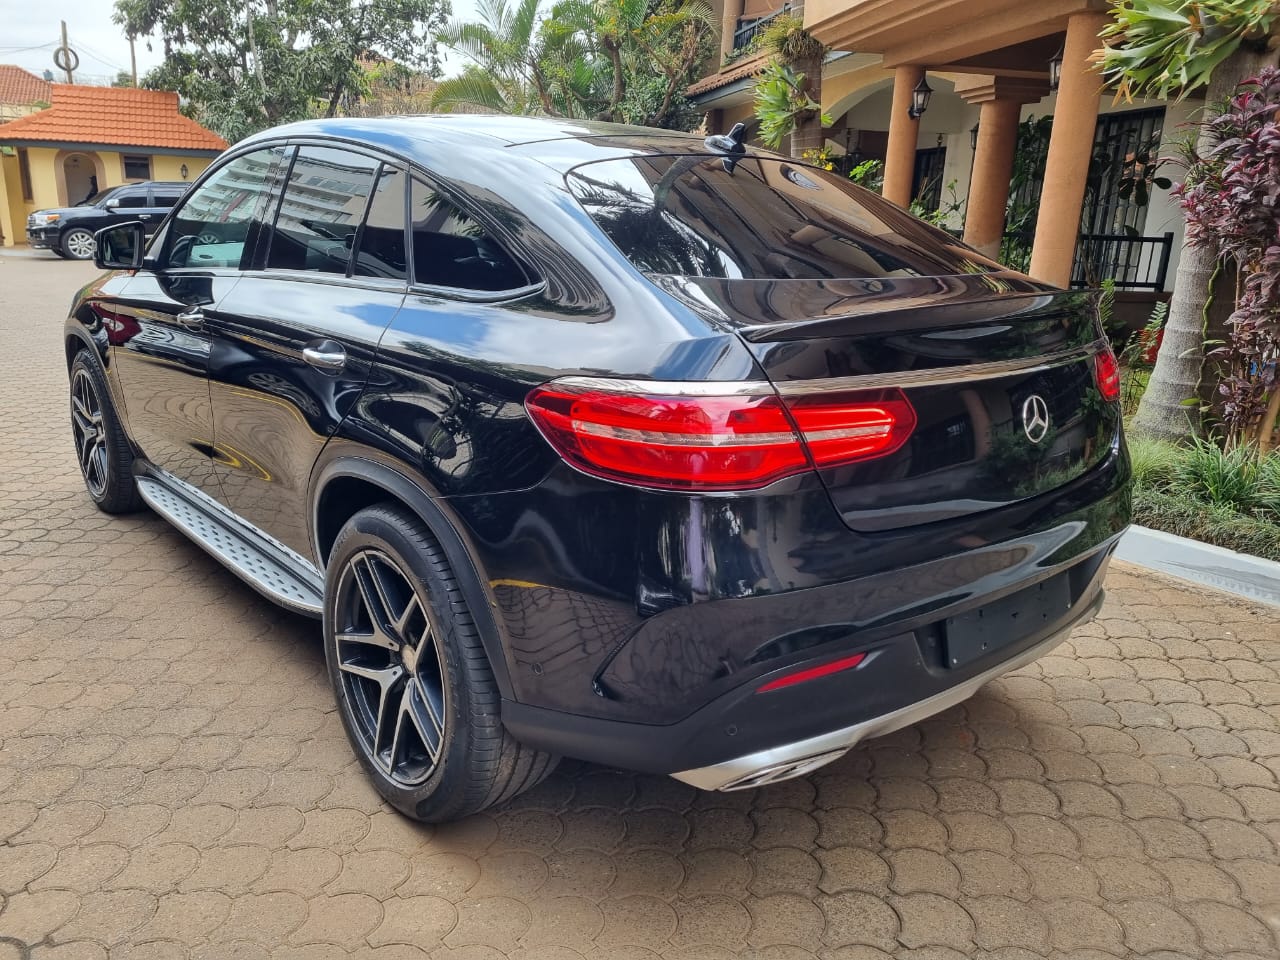 MERCEDES BENZ GLE 450 COUPE 2015 Fully loaded EXCLUSIVE!